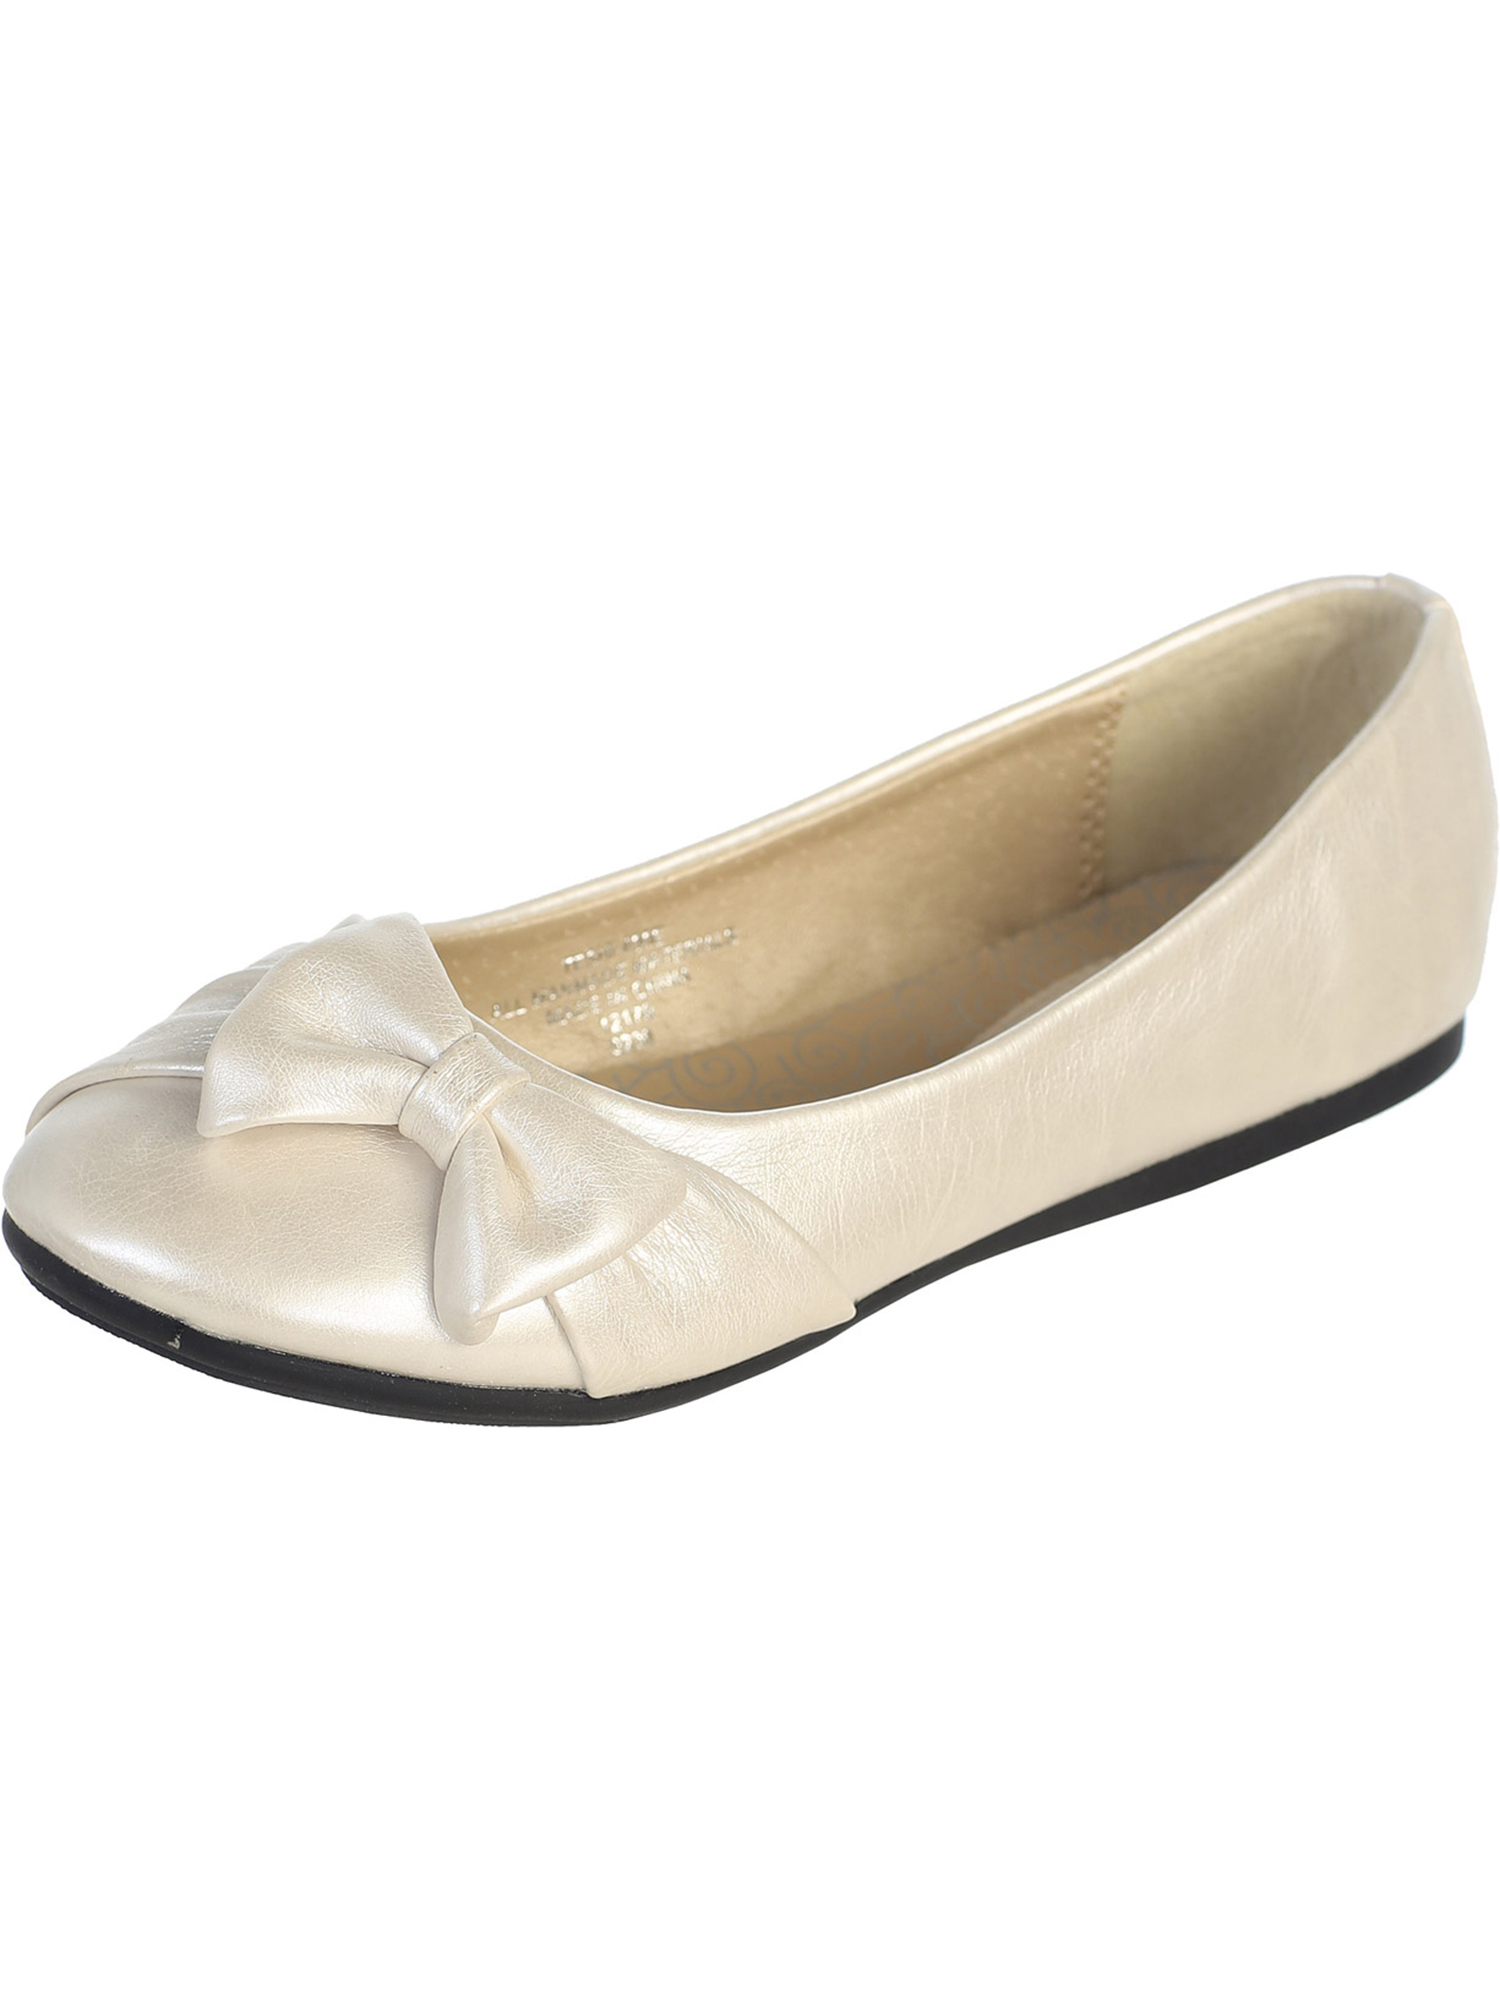 Ivory Pearl Girl's Flat Shoes with Side Bow Infant 8